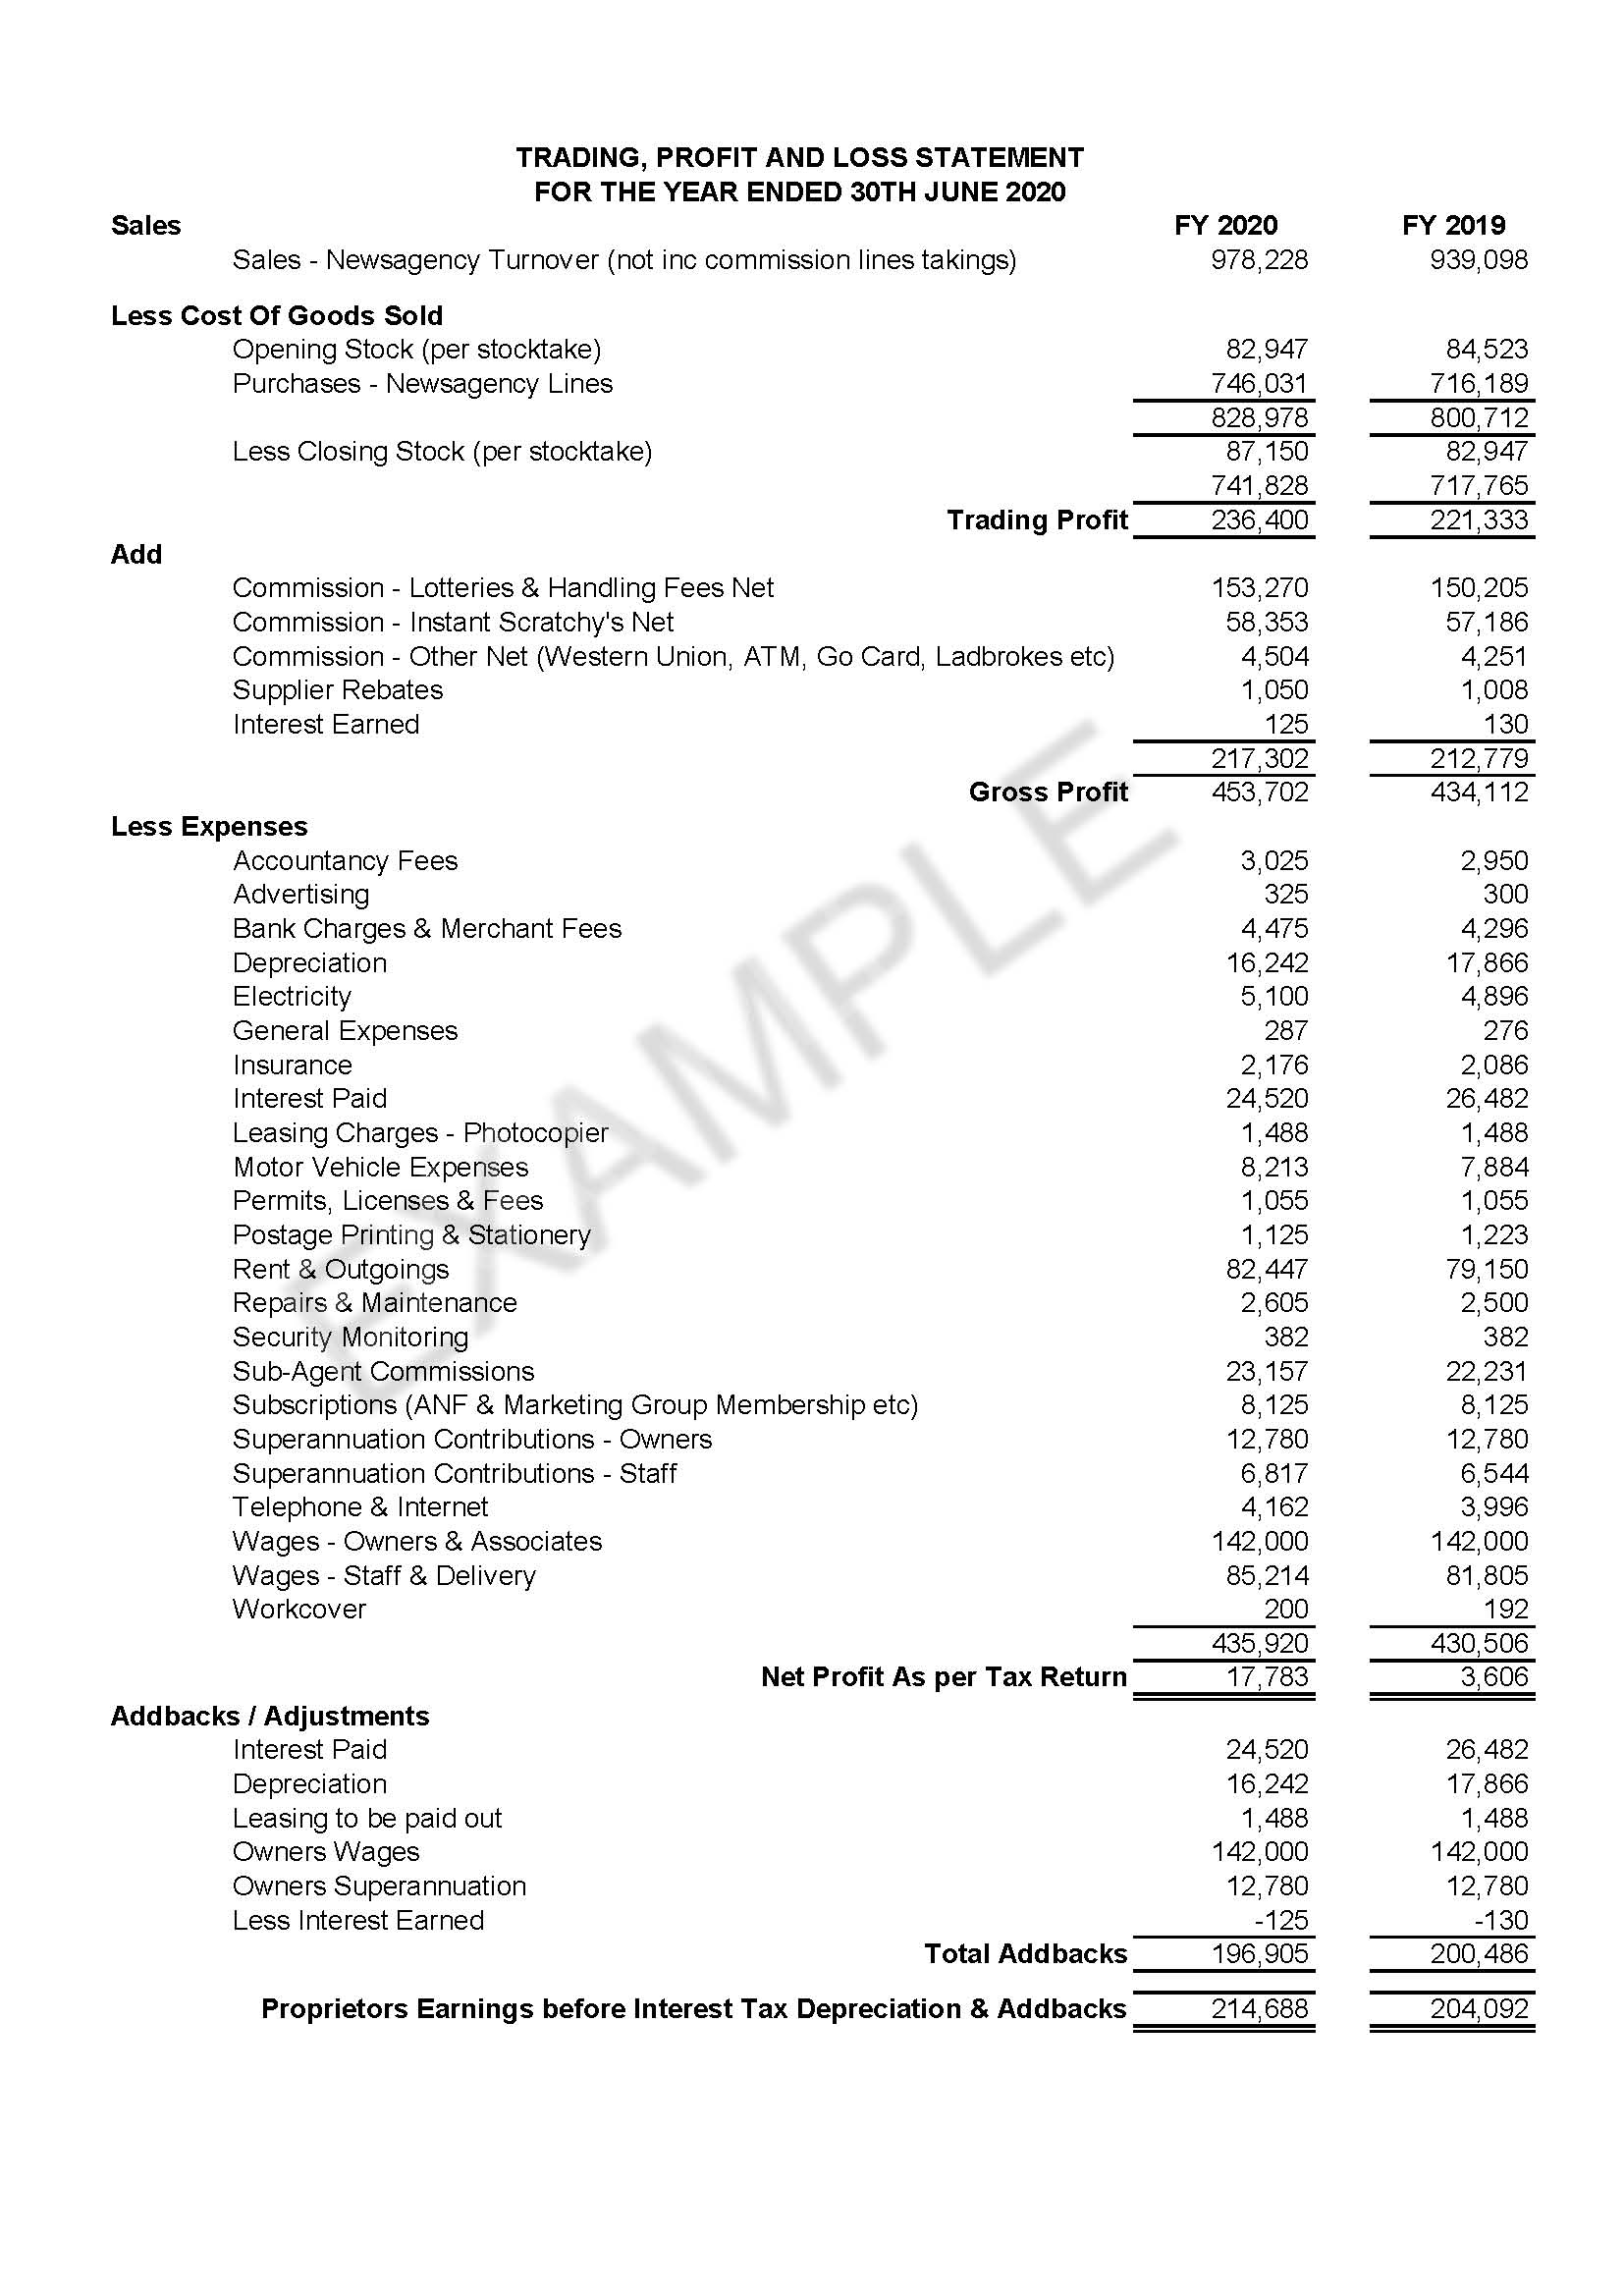 Example Profit & Loss Statement format | Newsagencies For Sale